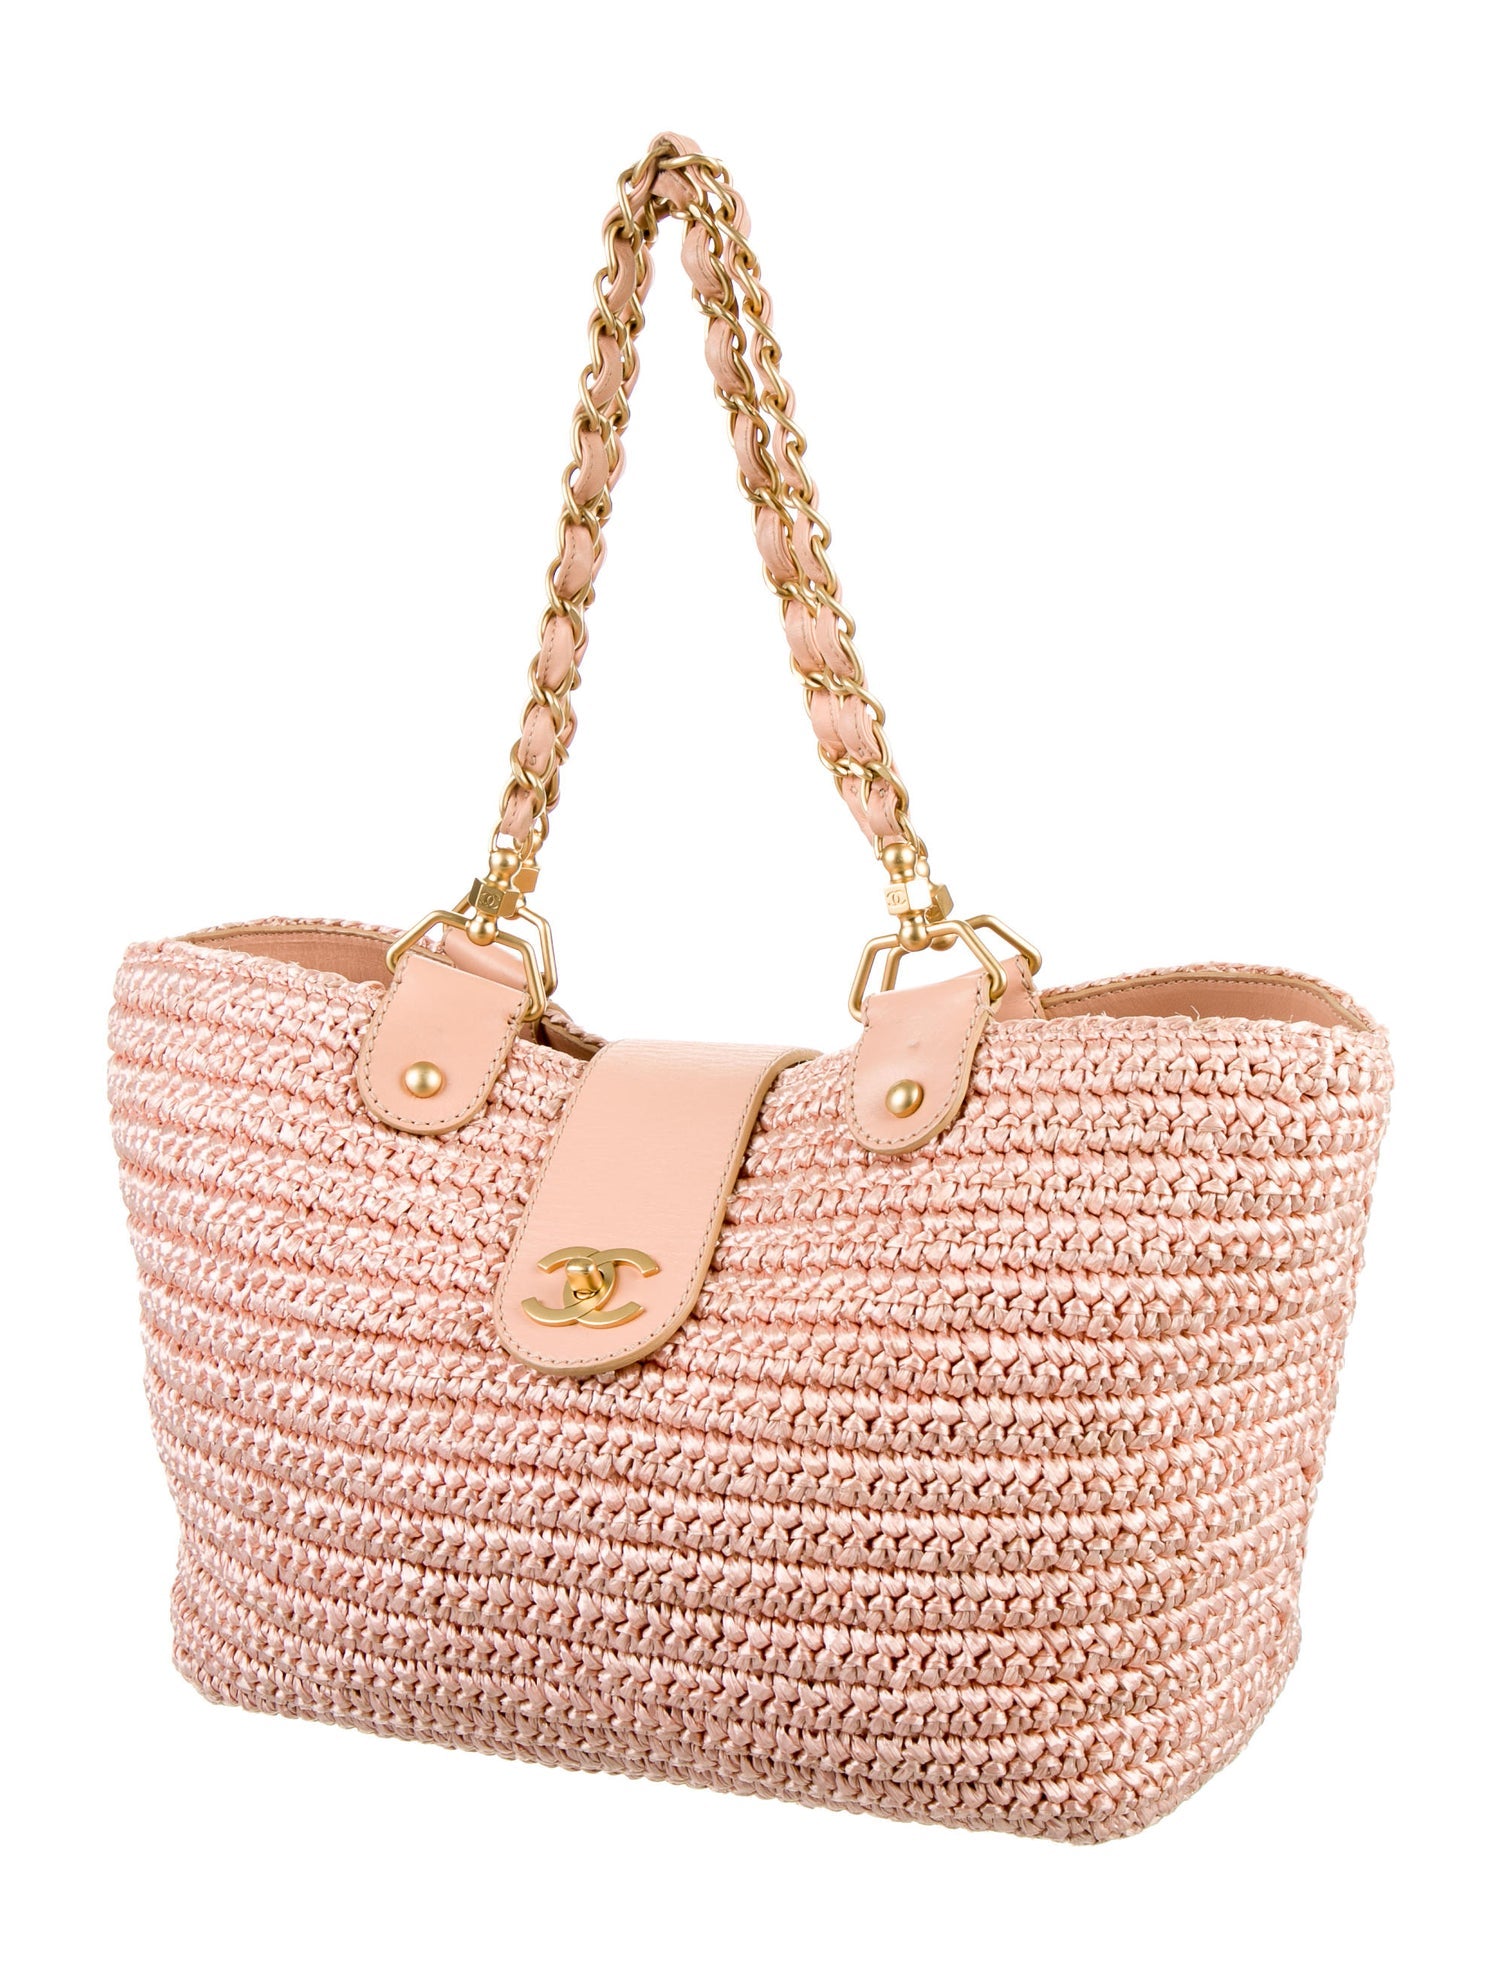 Chanel Pink Shopping Organic Raffia Summer Pink Straw and Leather Tote